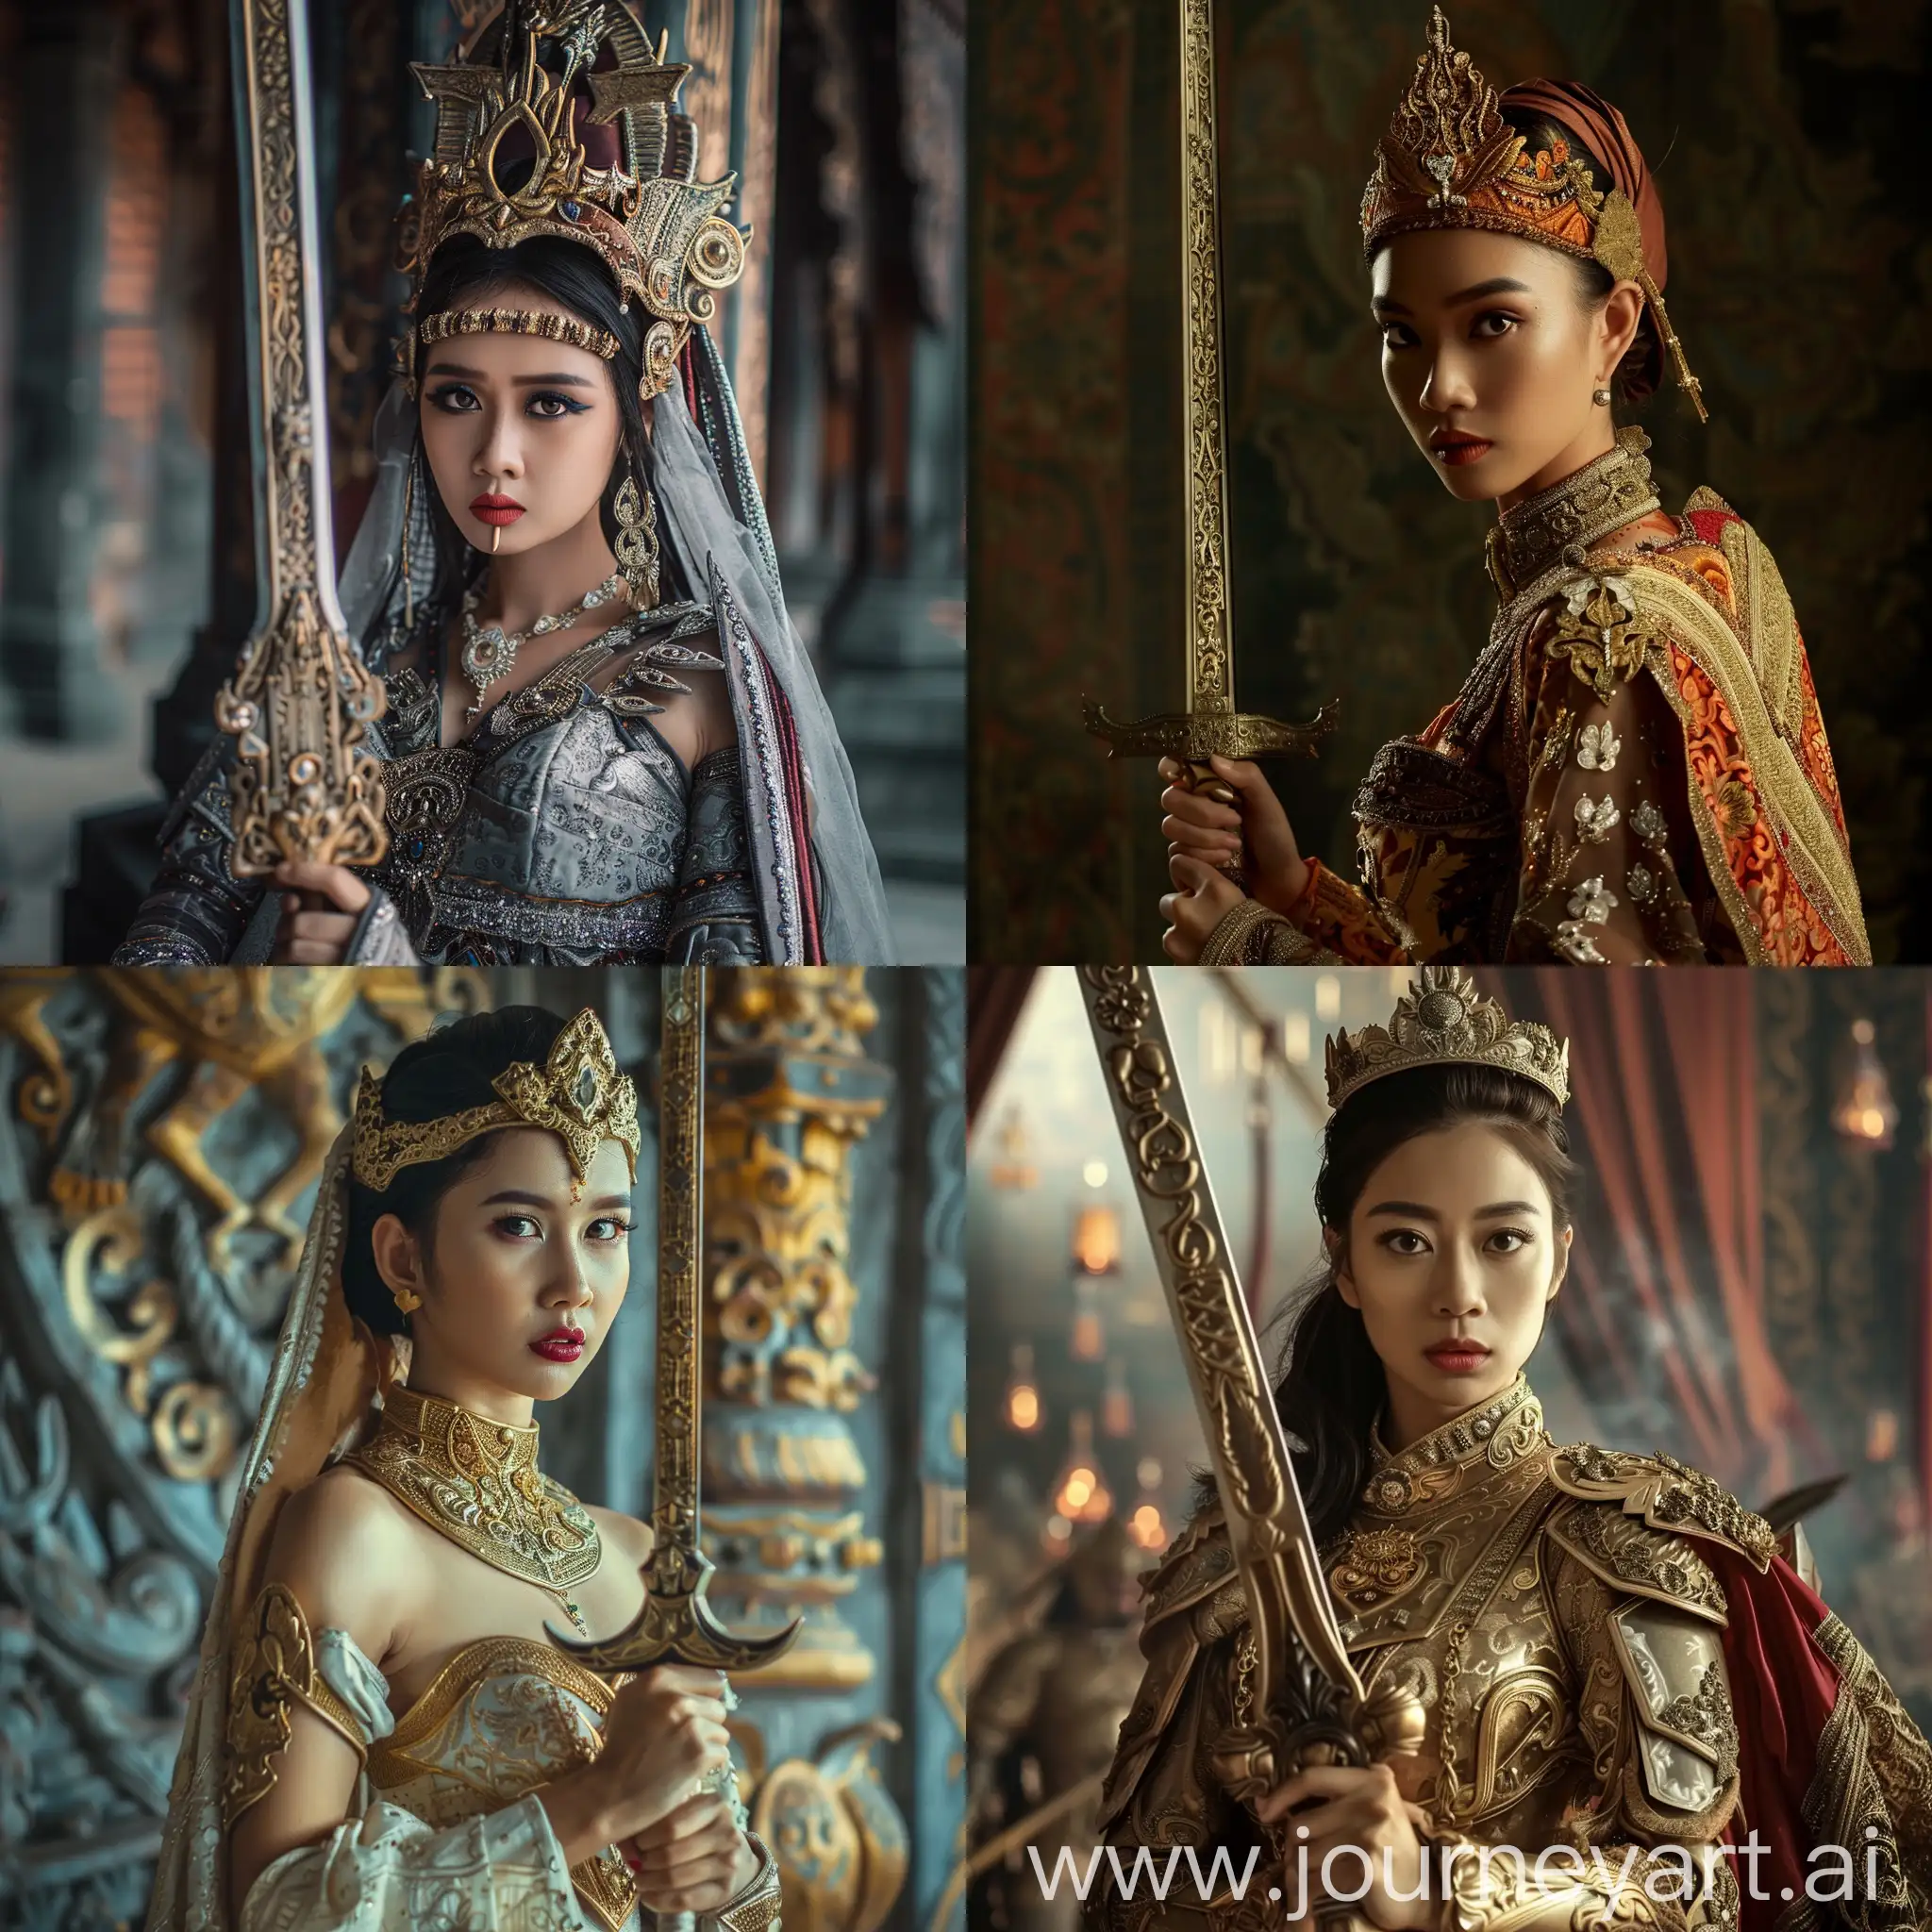 a beautiful woman from the Indonesian Majapahit kingdom, dressed as a knight, holding a sword, Movie style, 